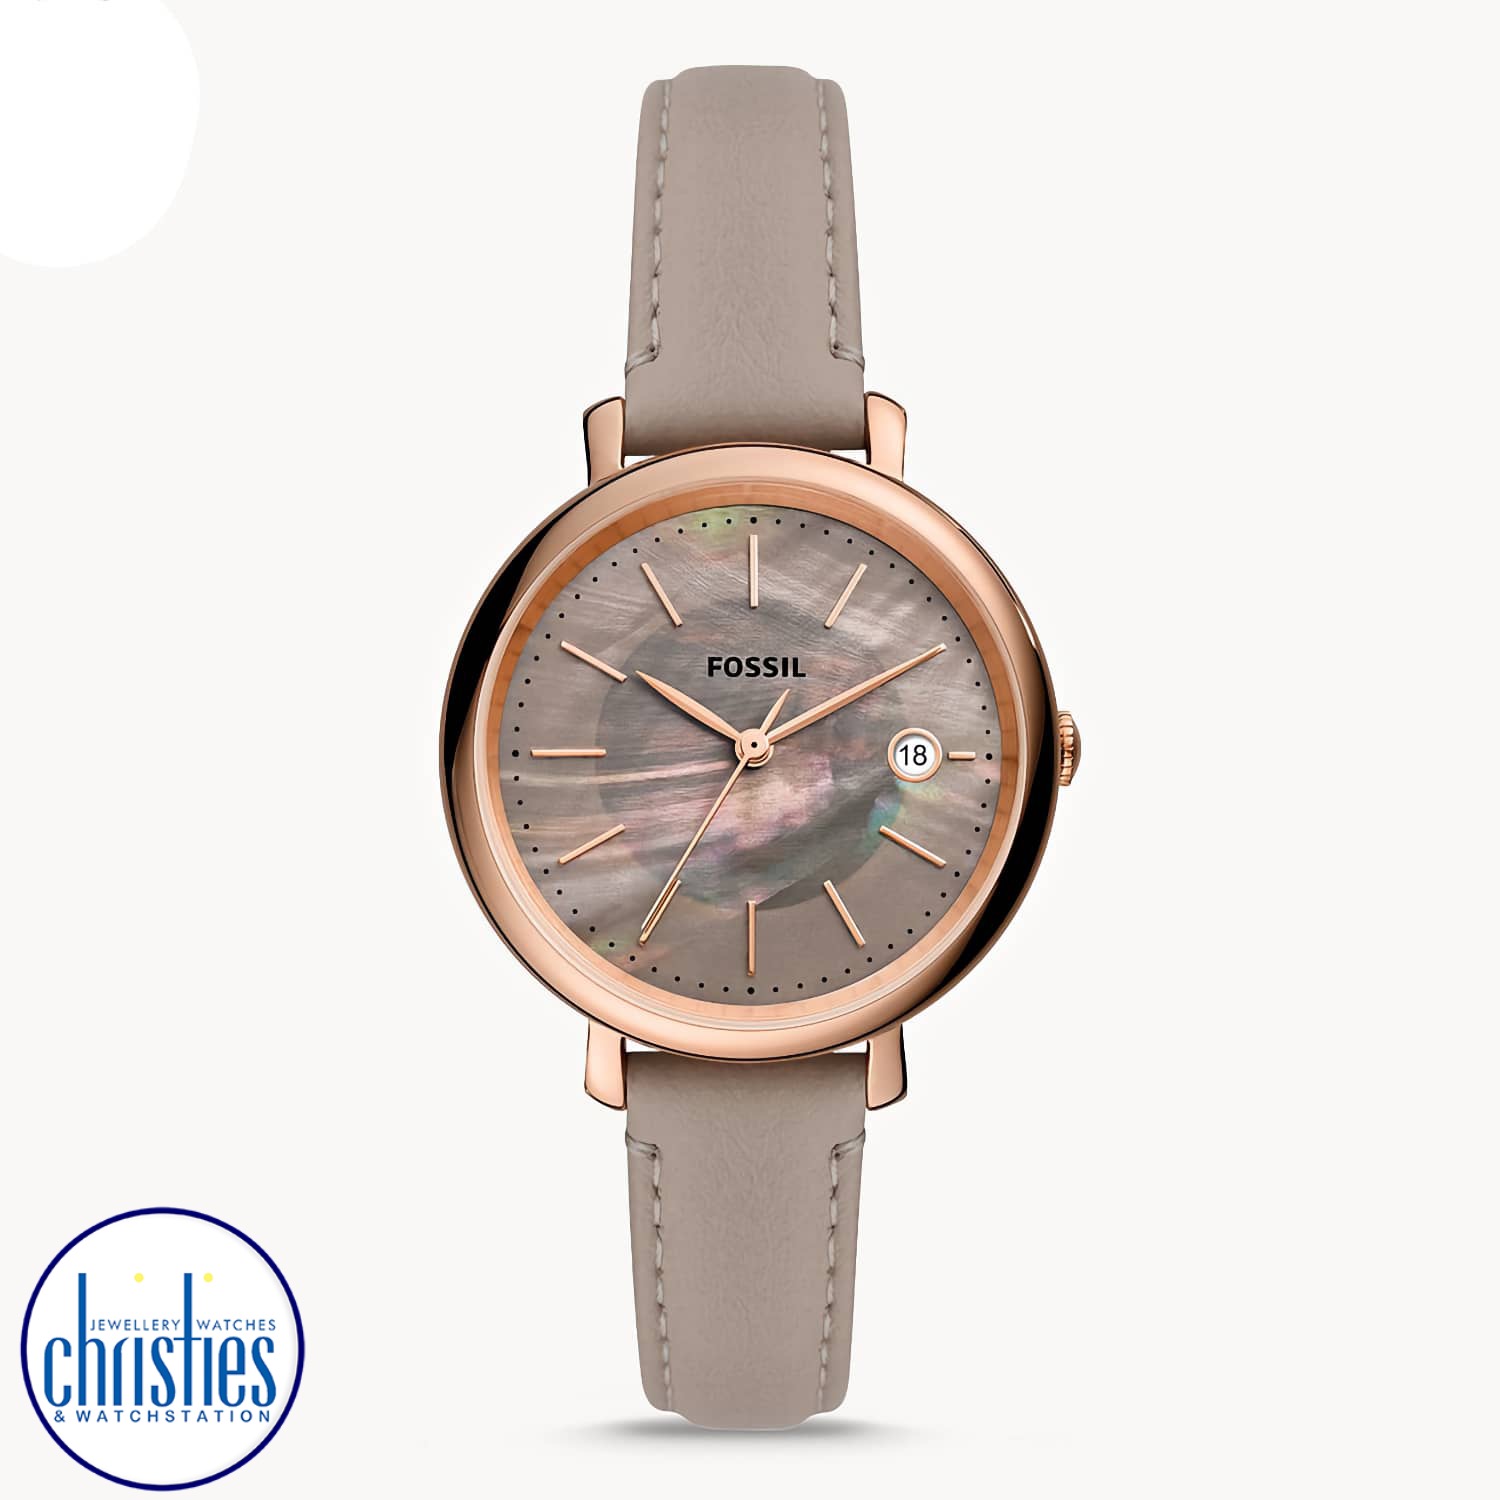 ES5091 Fossil Jacqueline Solar-Powered Grey Leather Watch. ES5091 Fossil Jacqueline Solar-Powered Grey Leather Watch Afterpay - Split your purchase into 4 instalments - Pay for your purchase over 4 instalments, due every two weeks. You’ll pay your first i